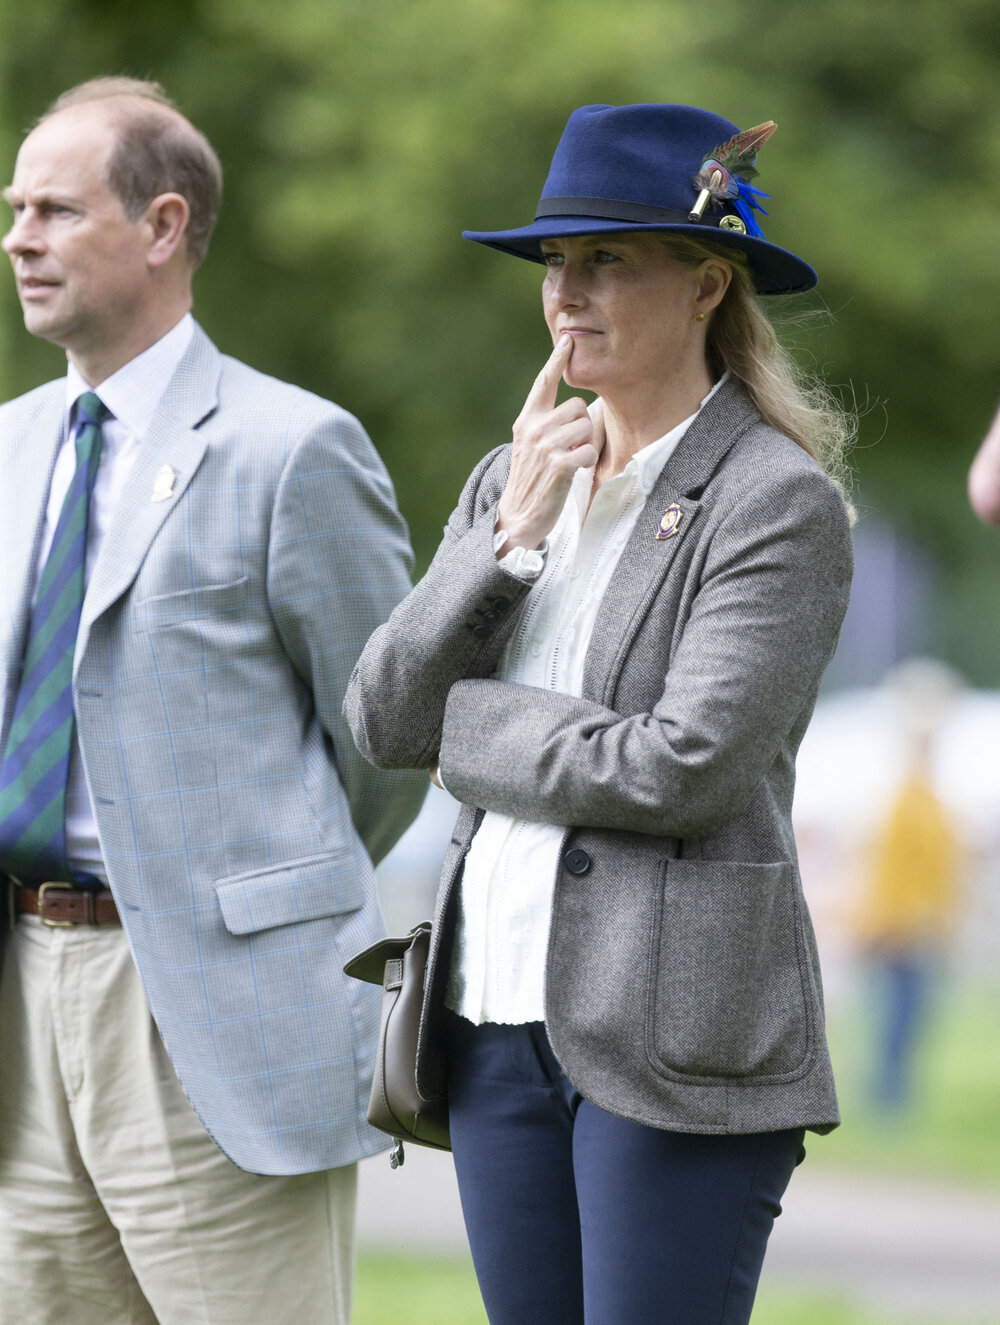 The Earl and Countess of Wessex Attend Royal Windsor Horse Show 2021 ...